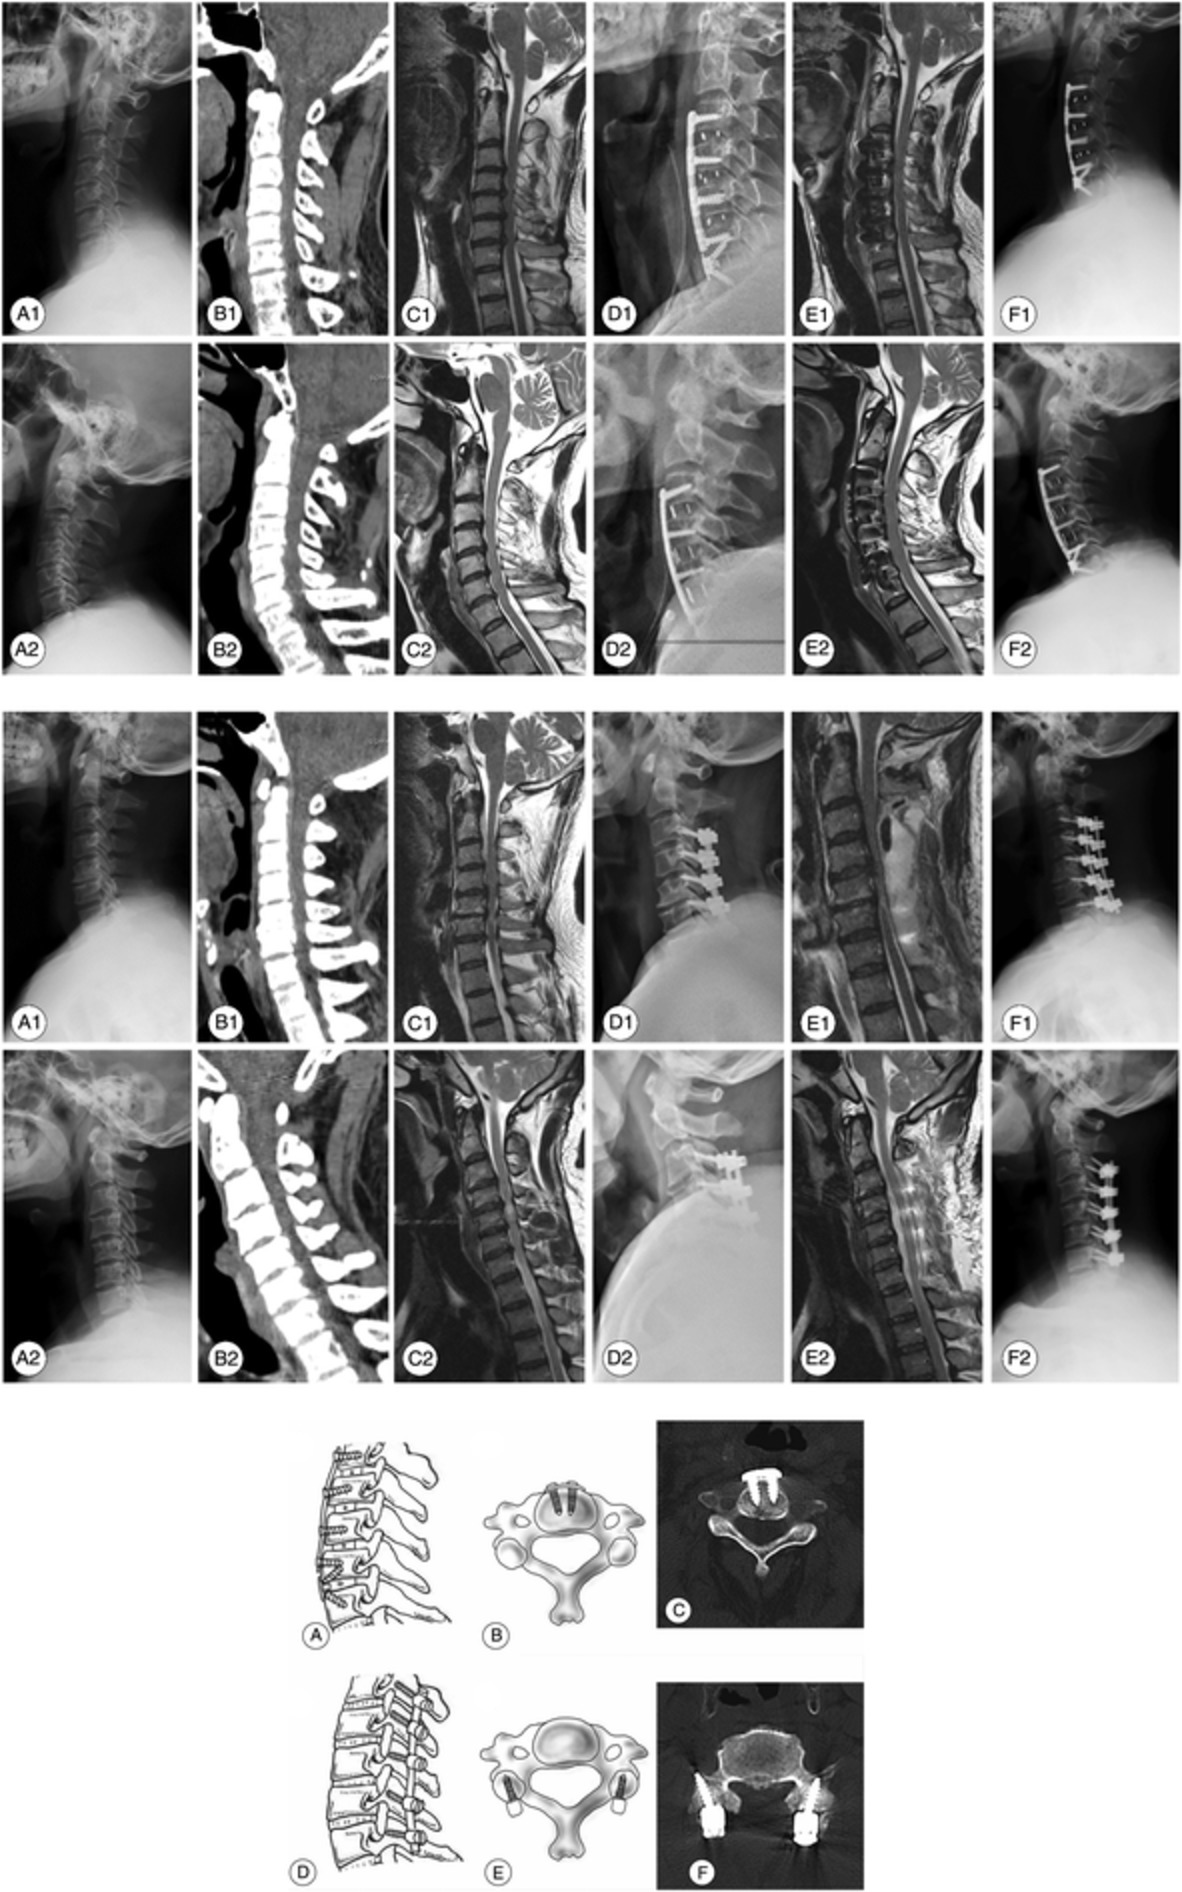 Comparison of Anterior Cervical Discectomy and Fusion with Cervical Laminectomy and Fusion in the Treatment of 4‐Level Cervical Spondylotic Myelopathy